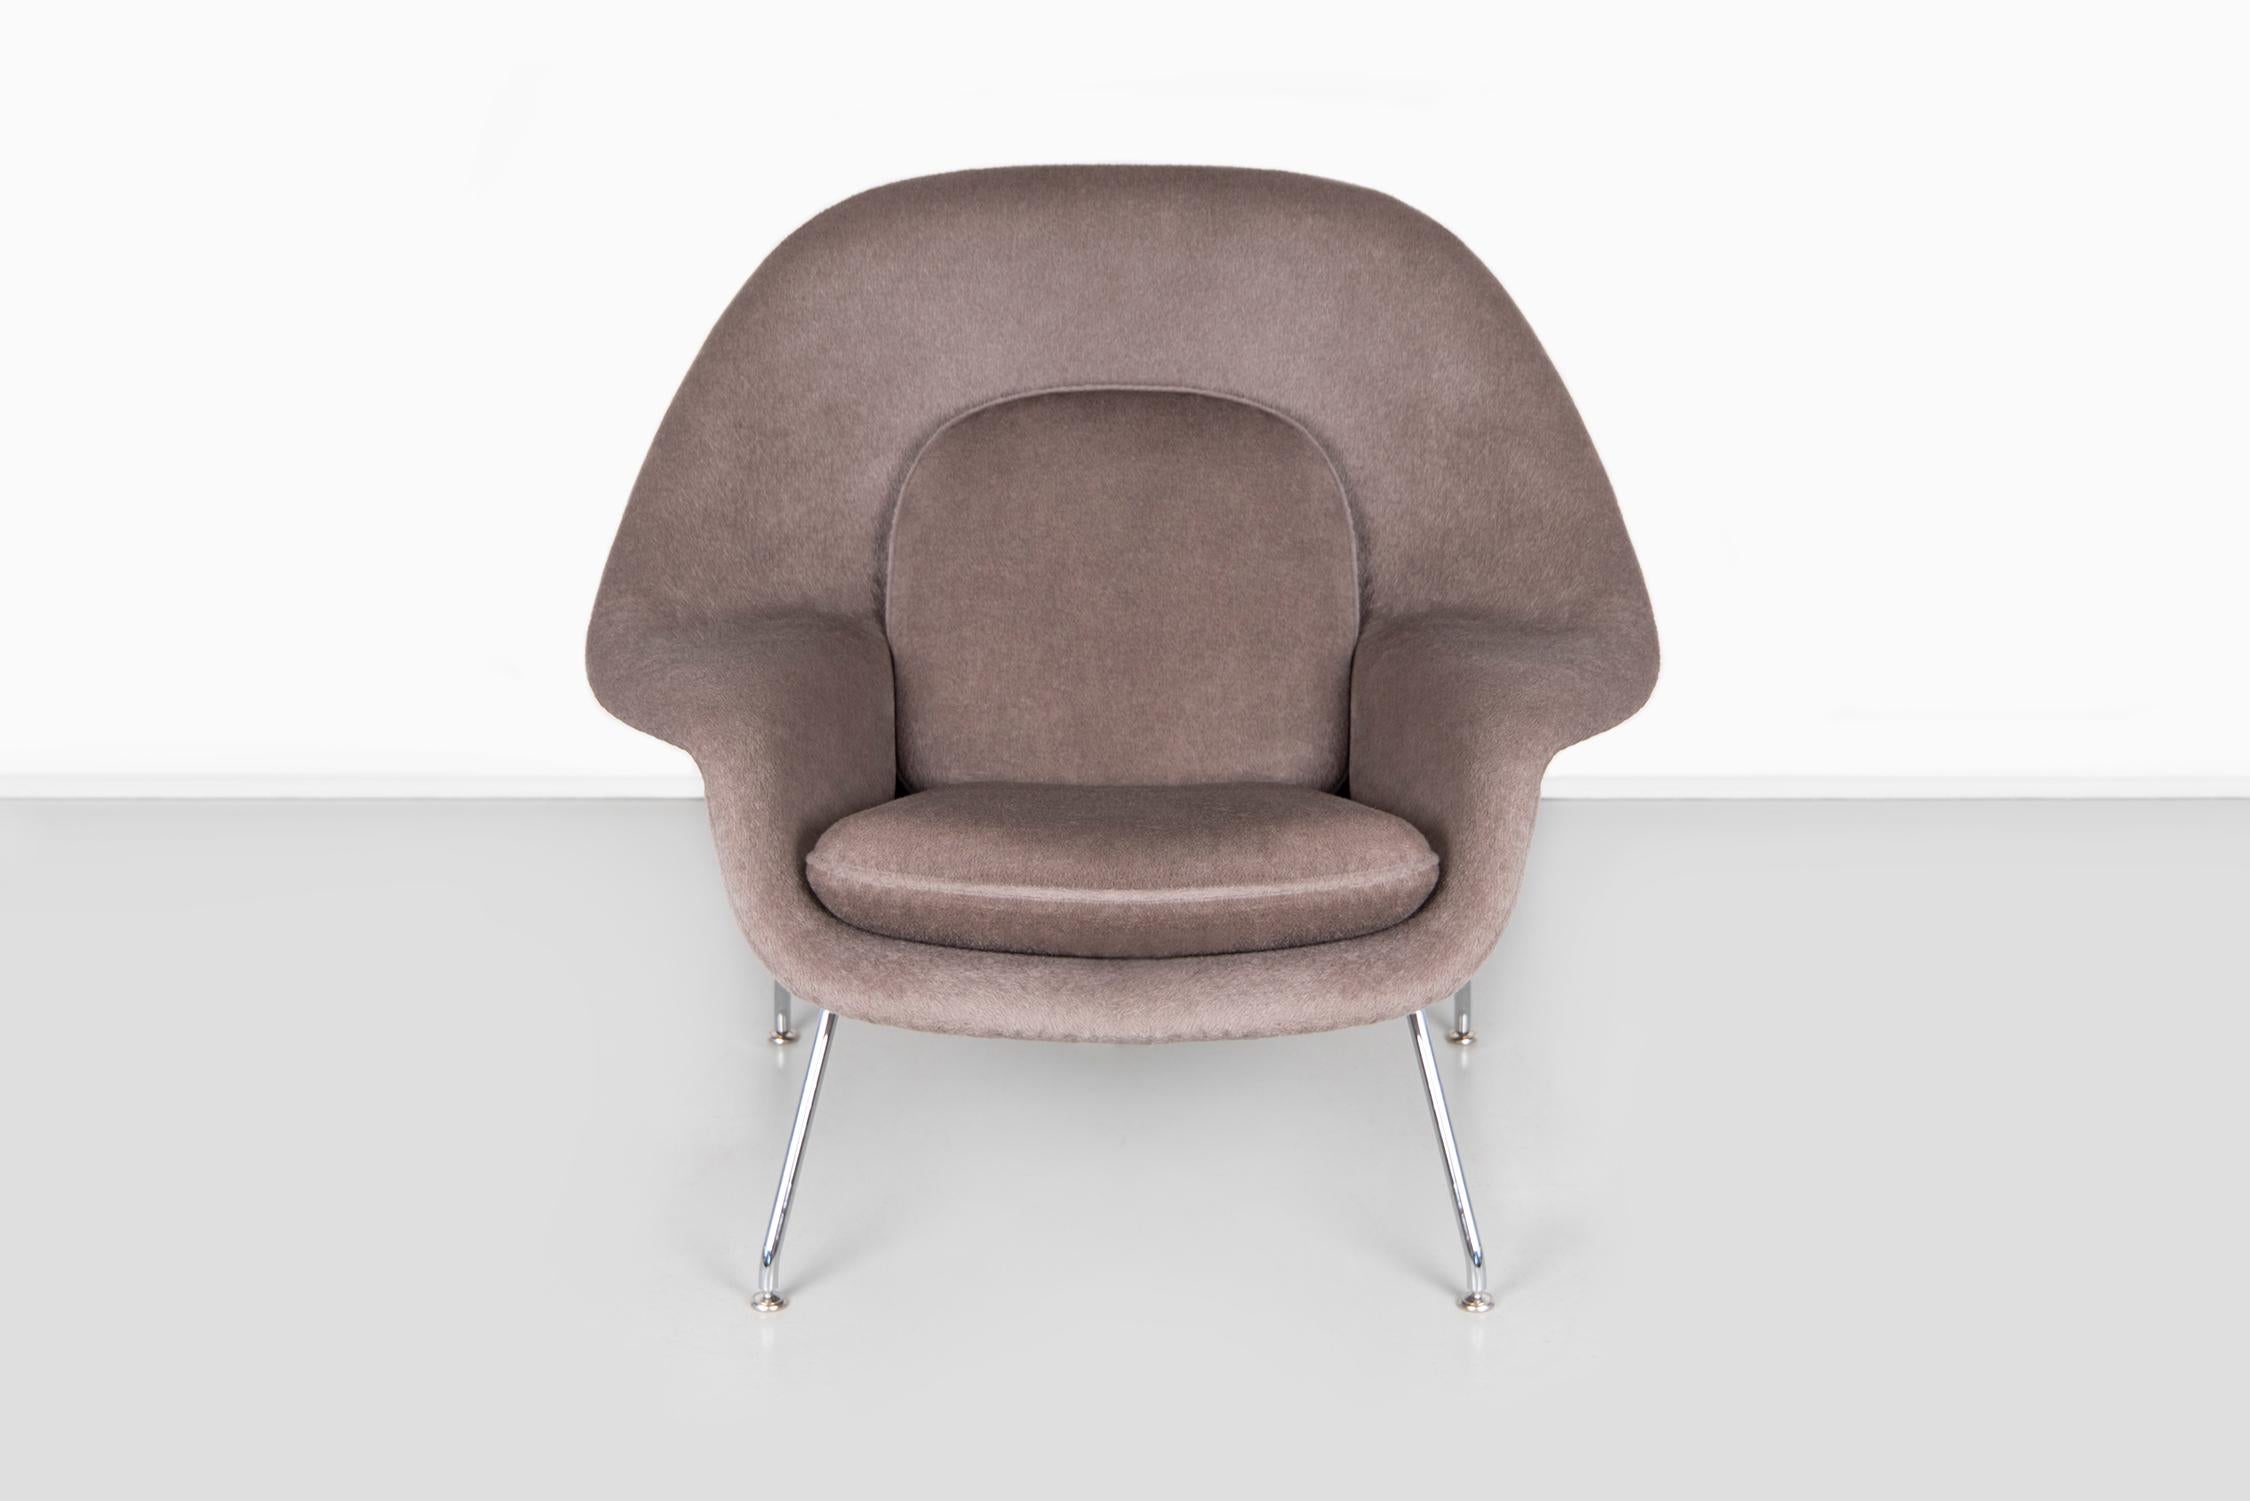 Womb chair

Designed by Eero Saarinen for Knoll

USA, d 1946 / circa 1960s

Freshly upholstered in alpaca over chrome

Measures: 31 ¼” H x 35 ¼” W x 31” D x seat 15 ½” H x arm 18” H.